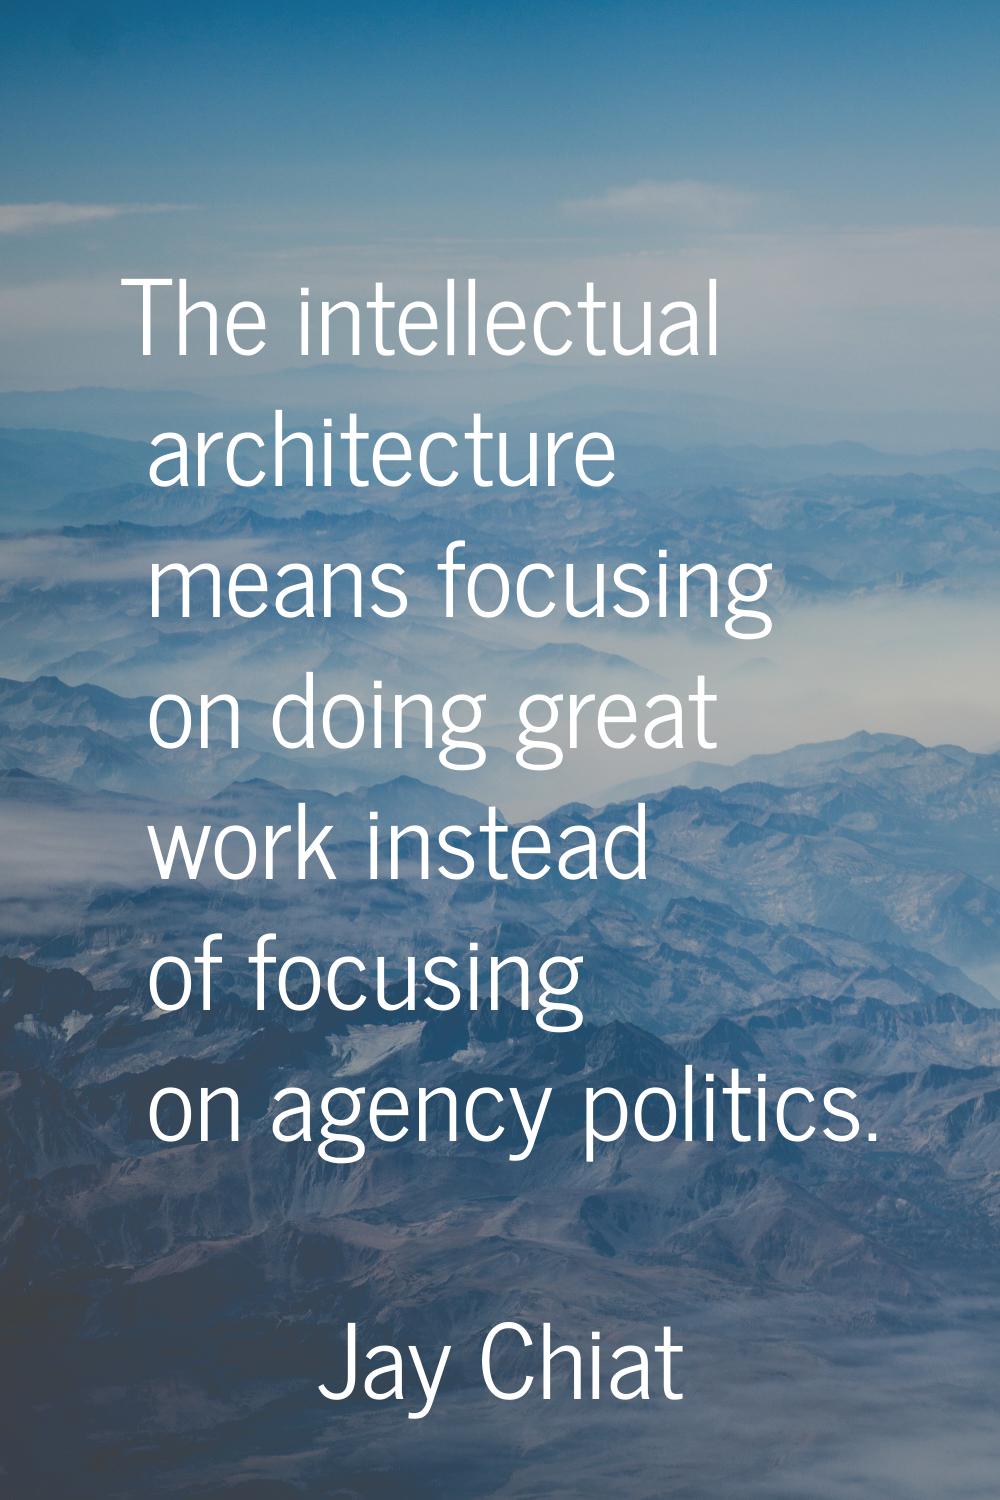 The intellectual architecture means focusing on doing great work instead of focusing on agency poli